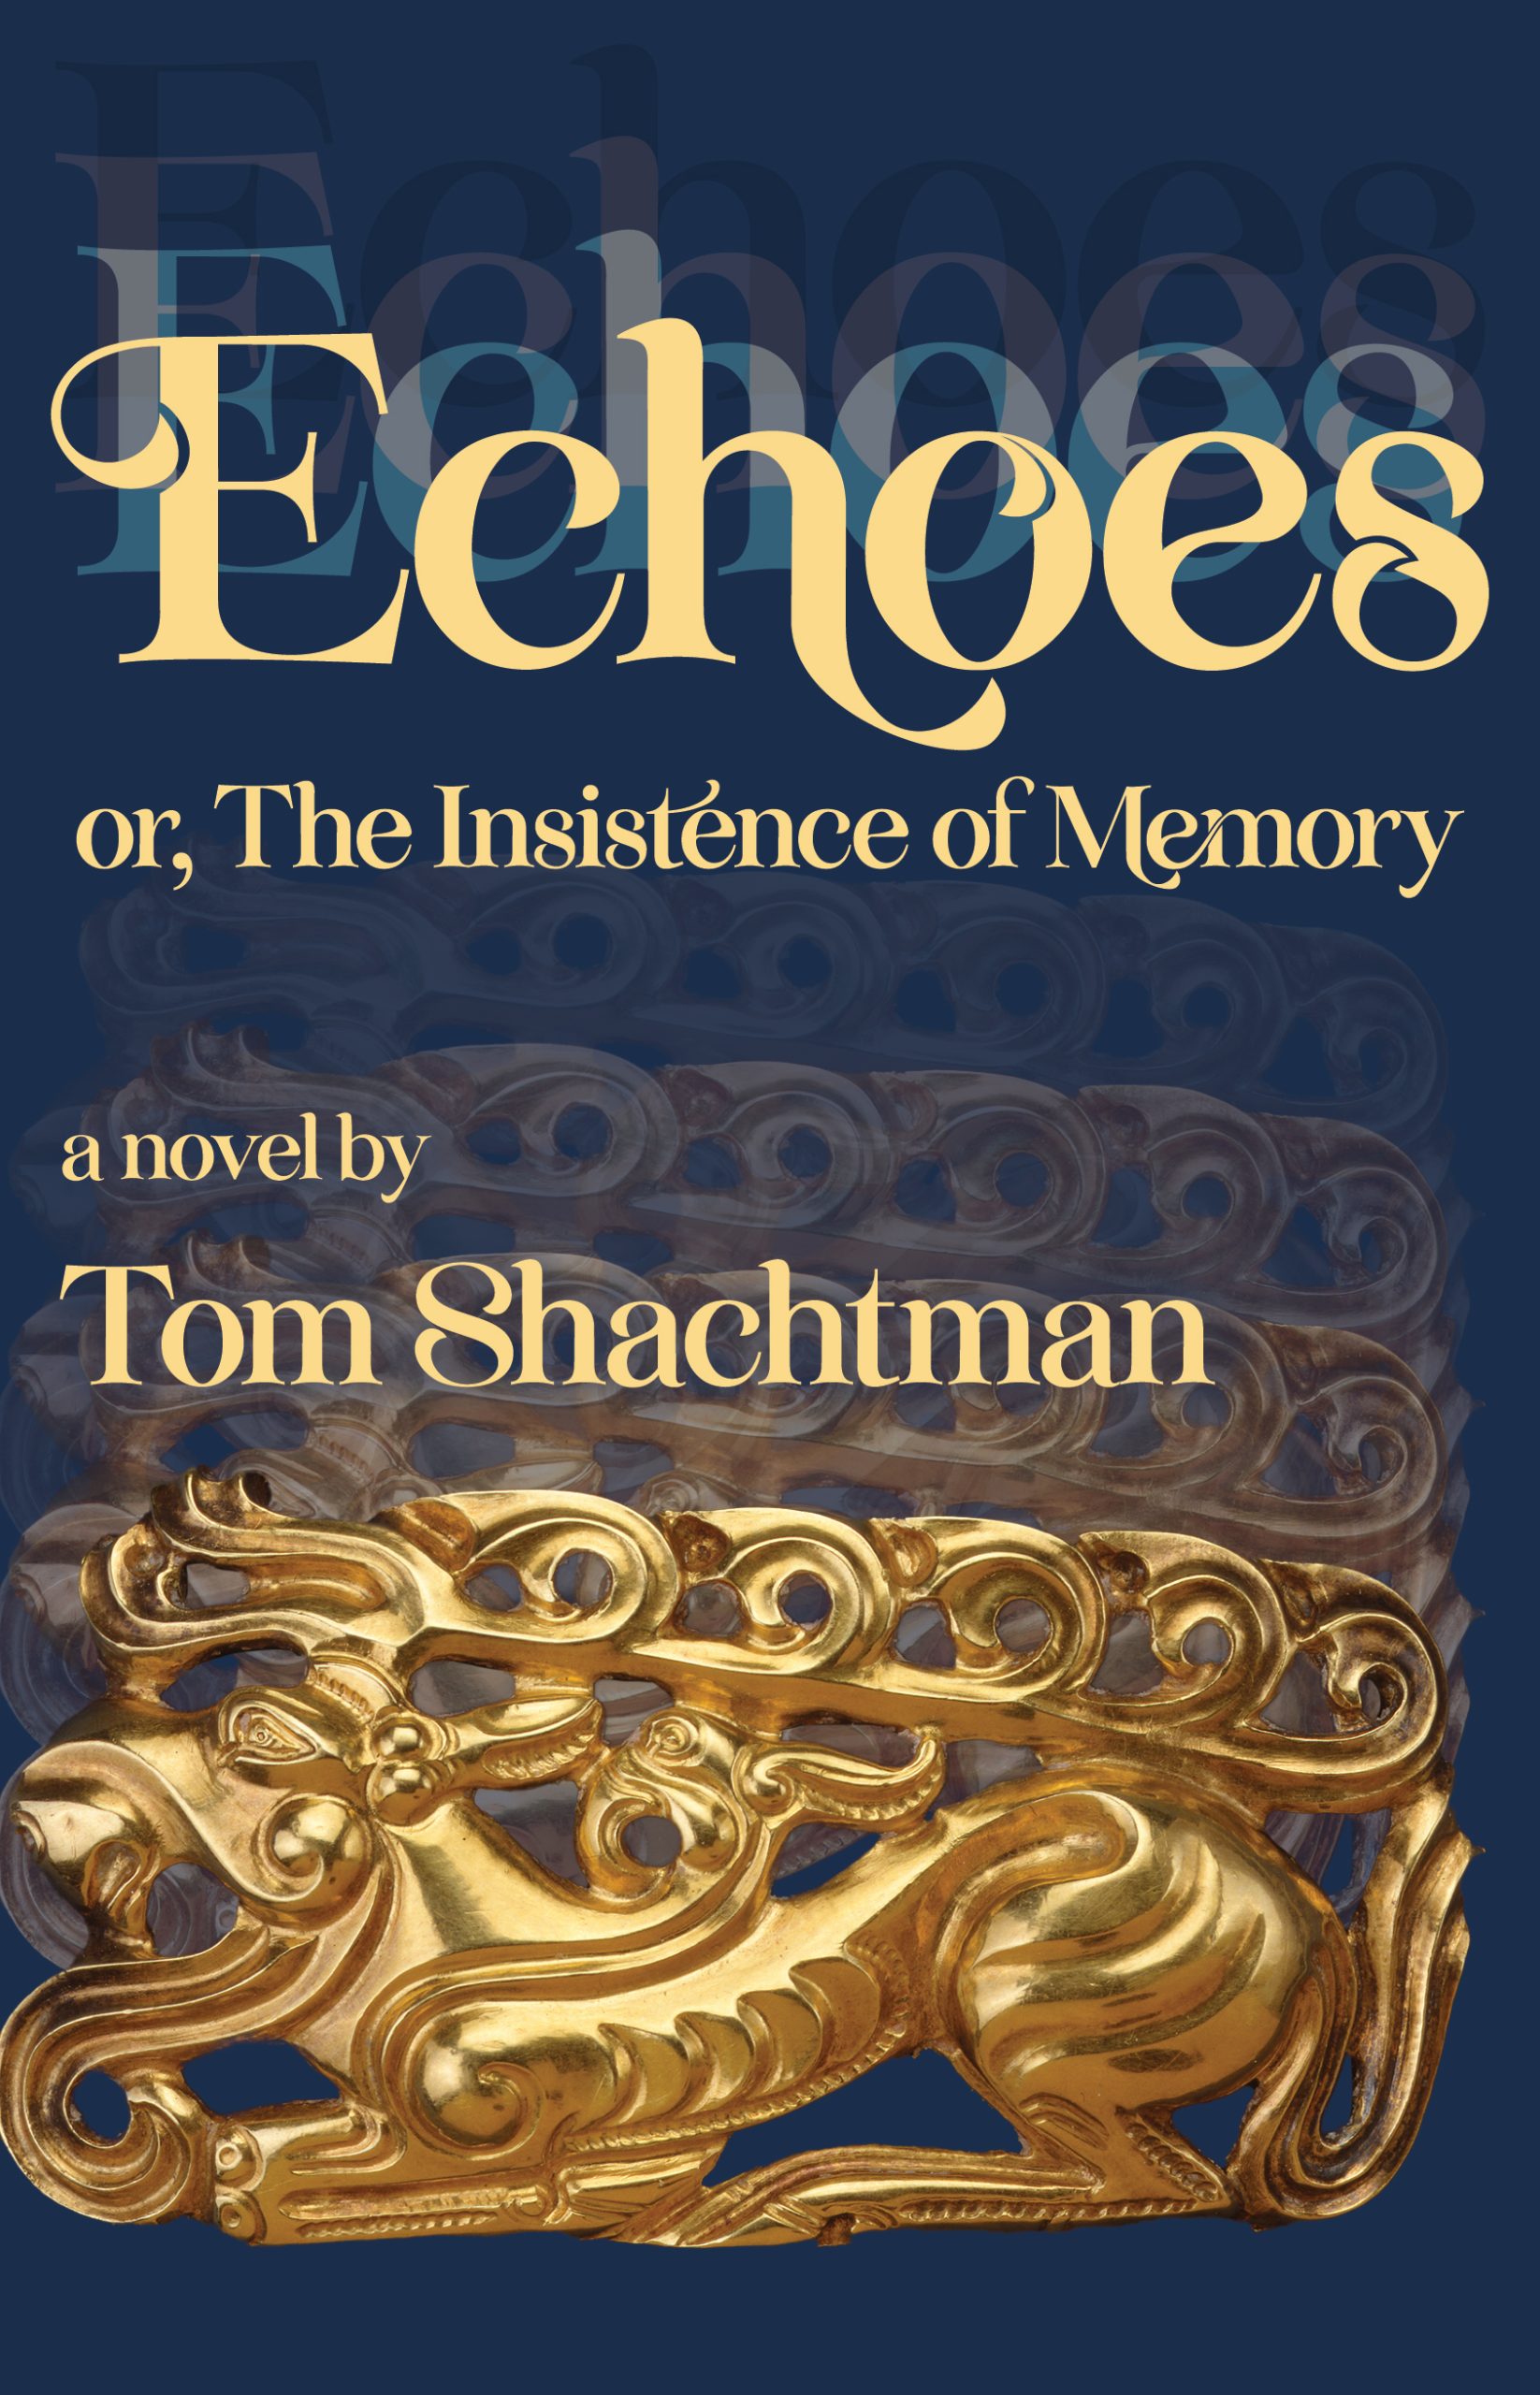 Echoes or, The Insistence of Memory a novel by Tom Shachtman shows ancient gold figure with echoes of the image fading on a background of solid blue.